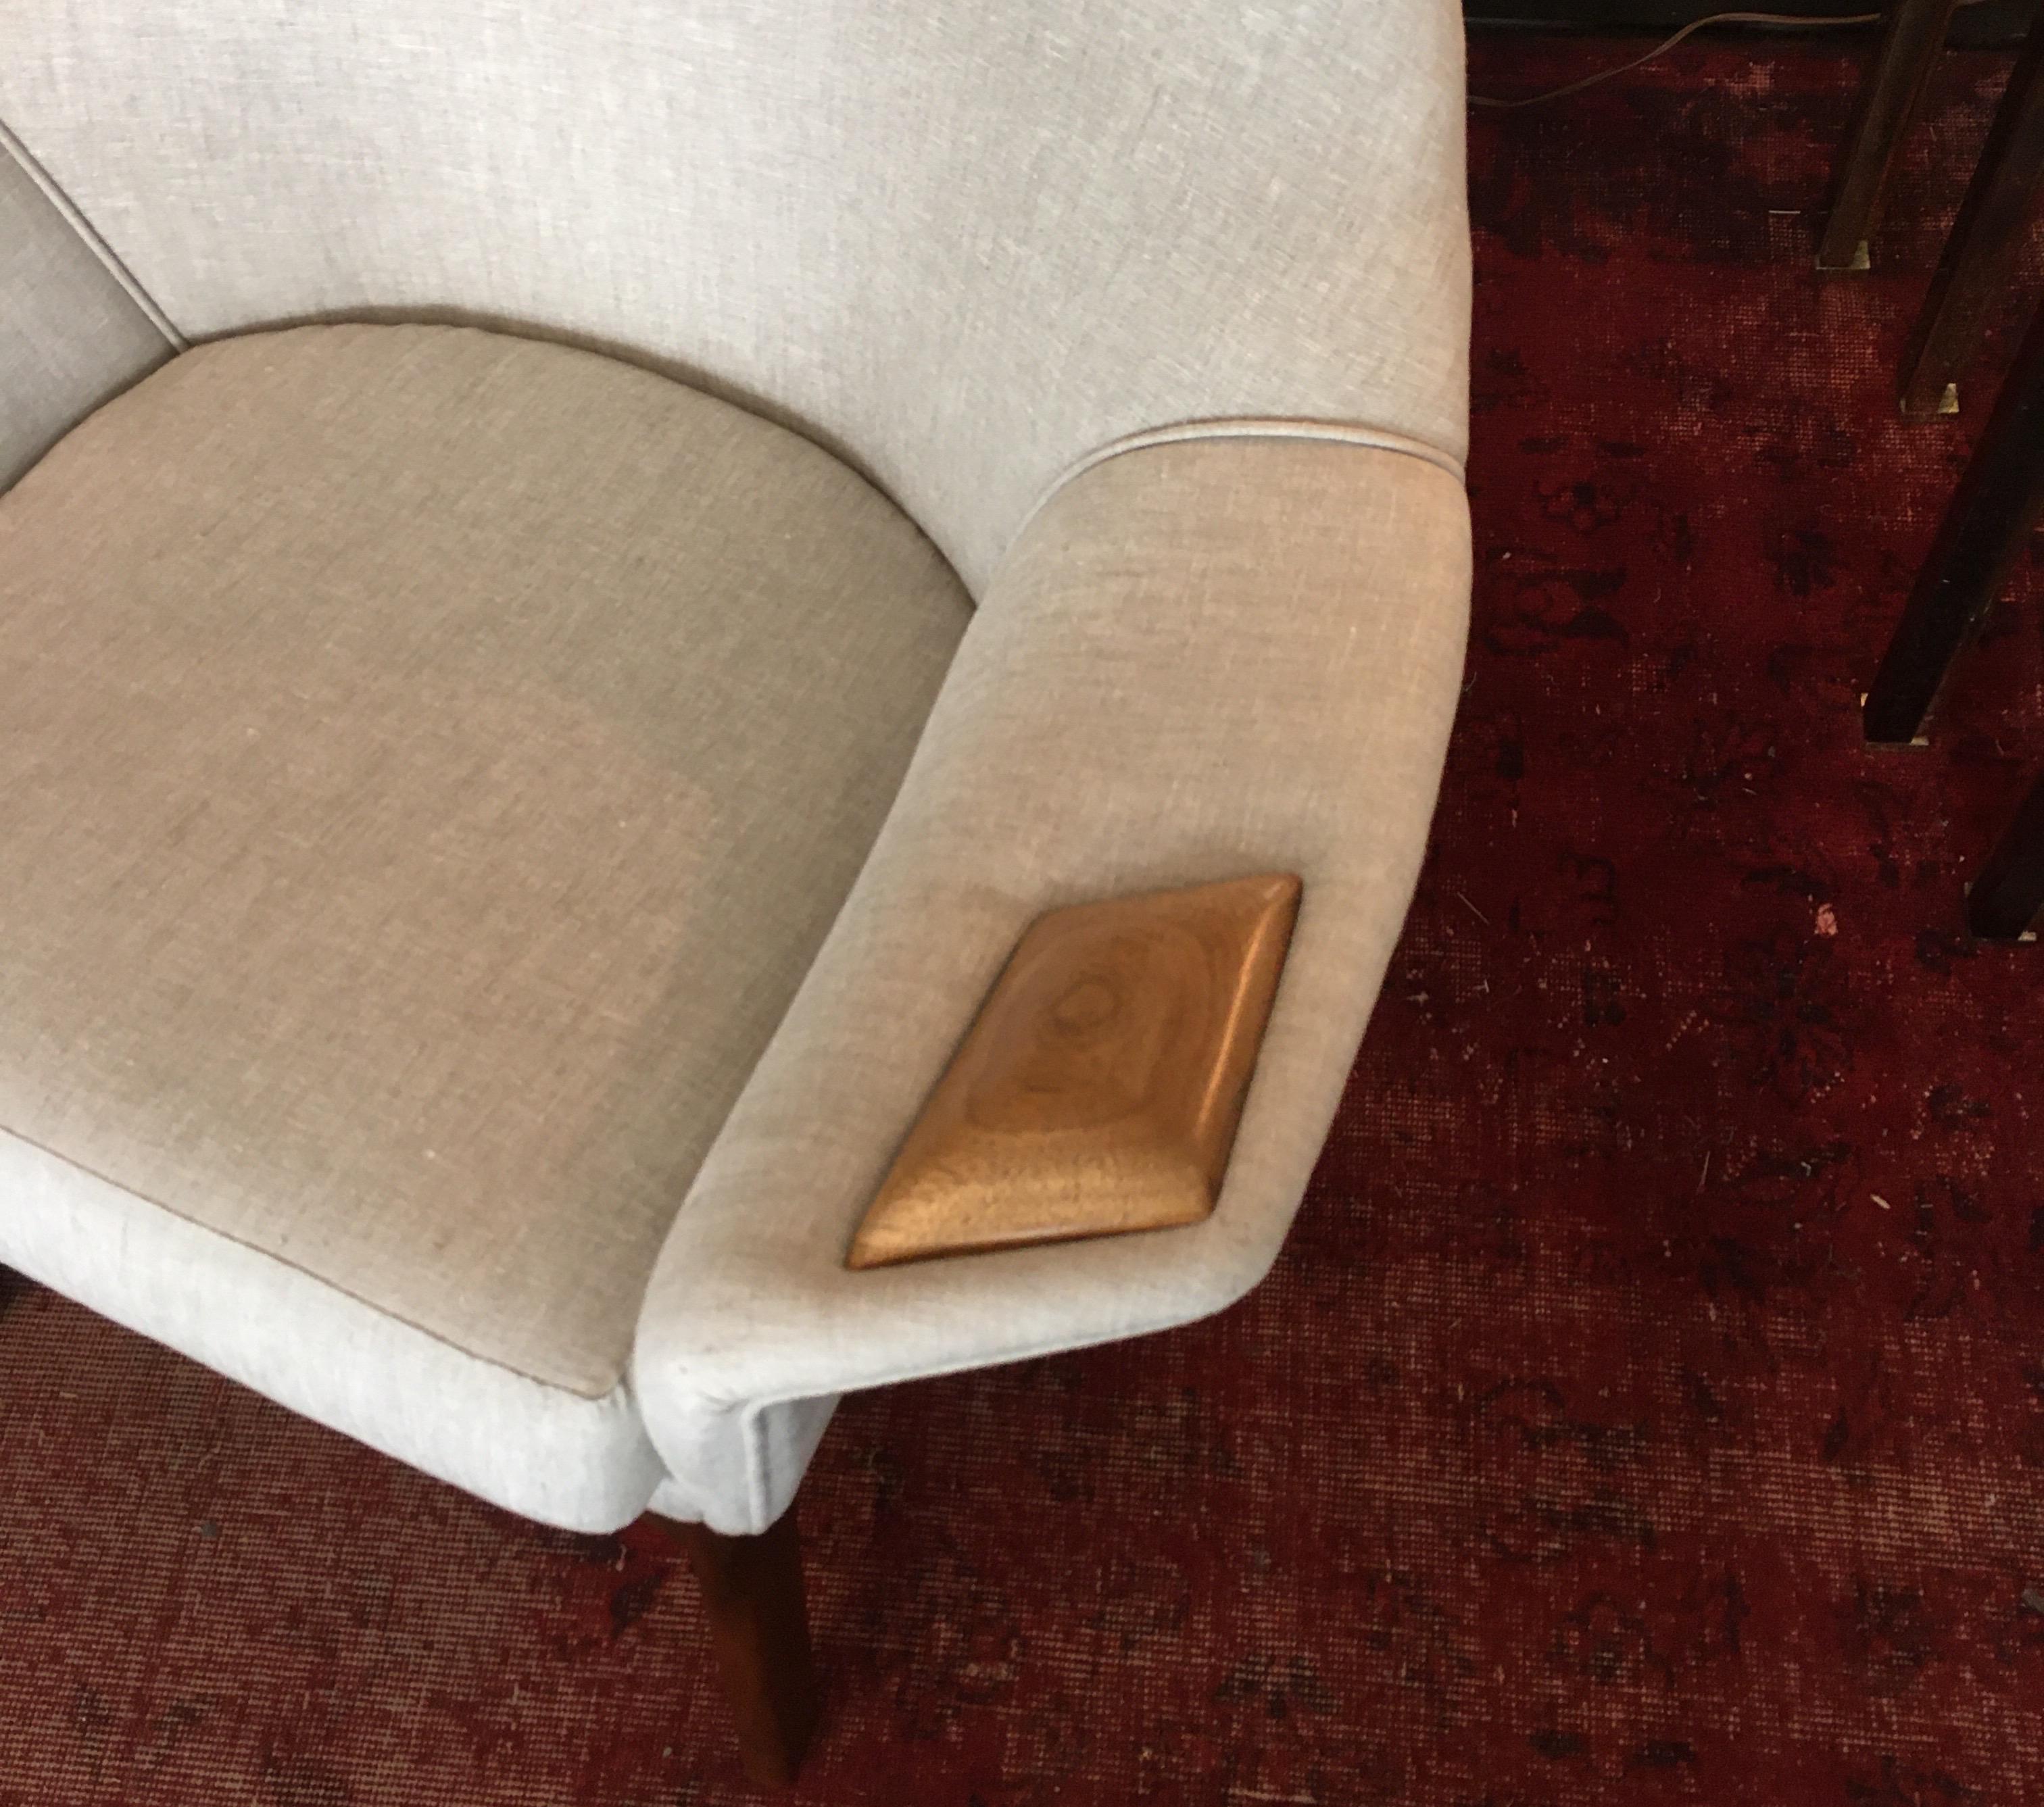 Sculptural midcentury lounge chair professionally reupholstered in linen, with wood inset arms. Very handsome from every angle and very comfortable.